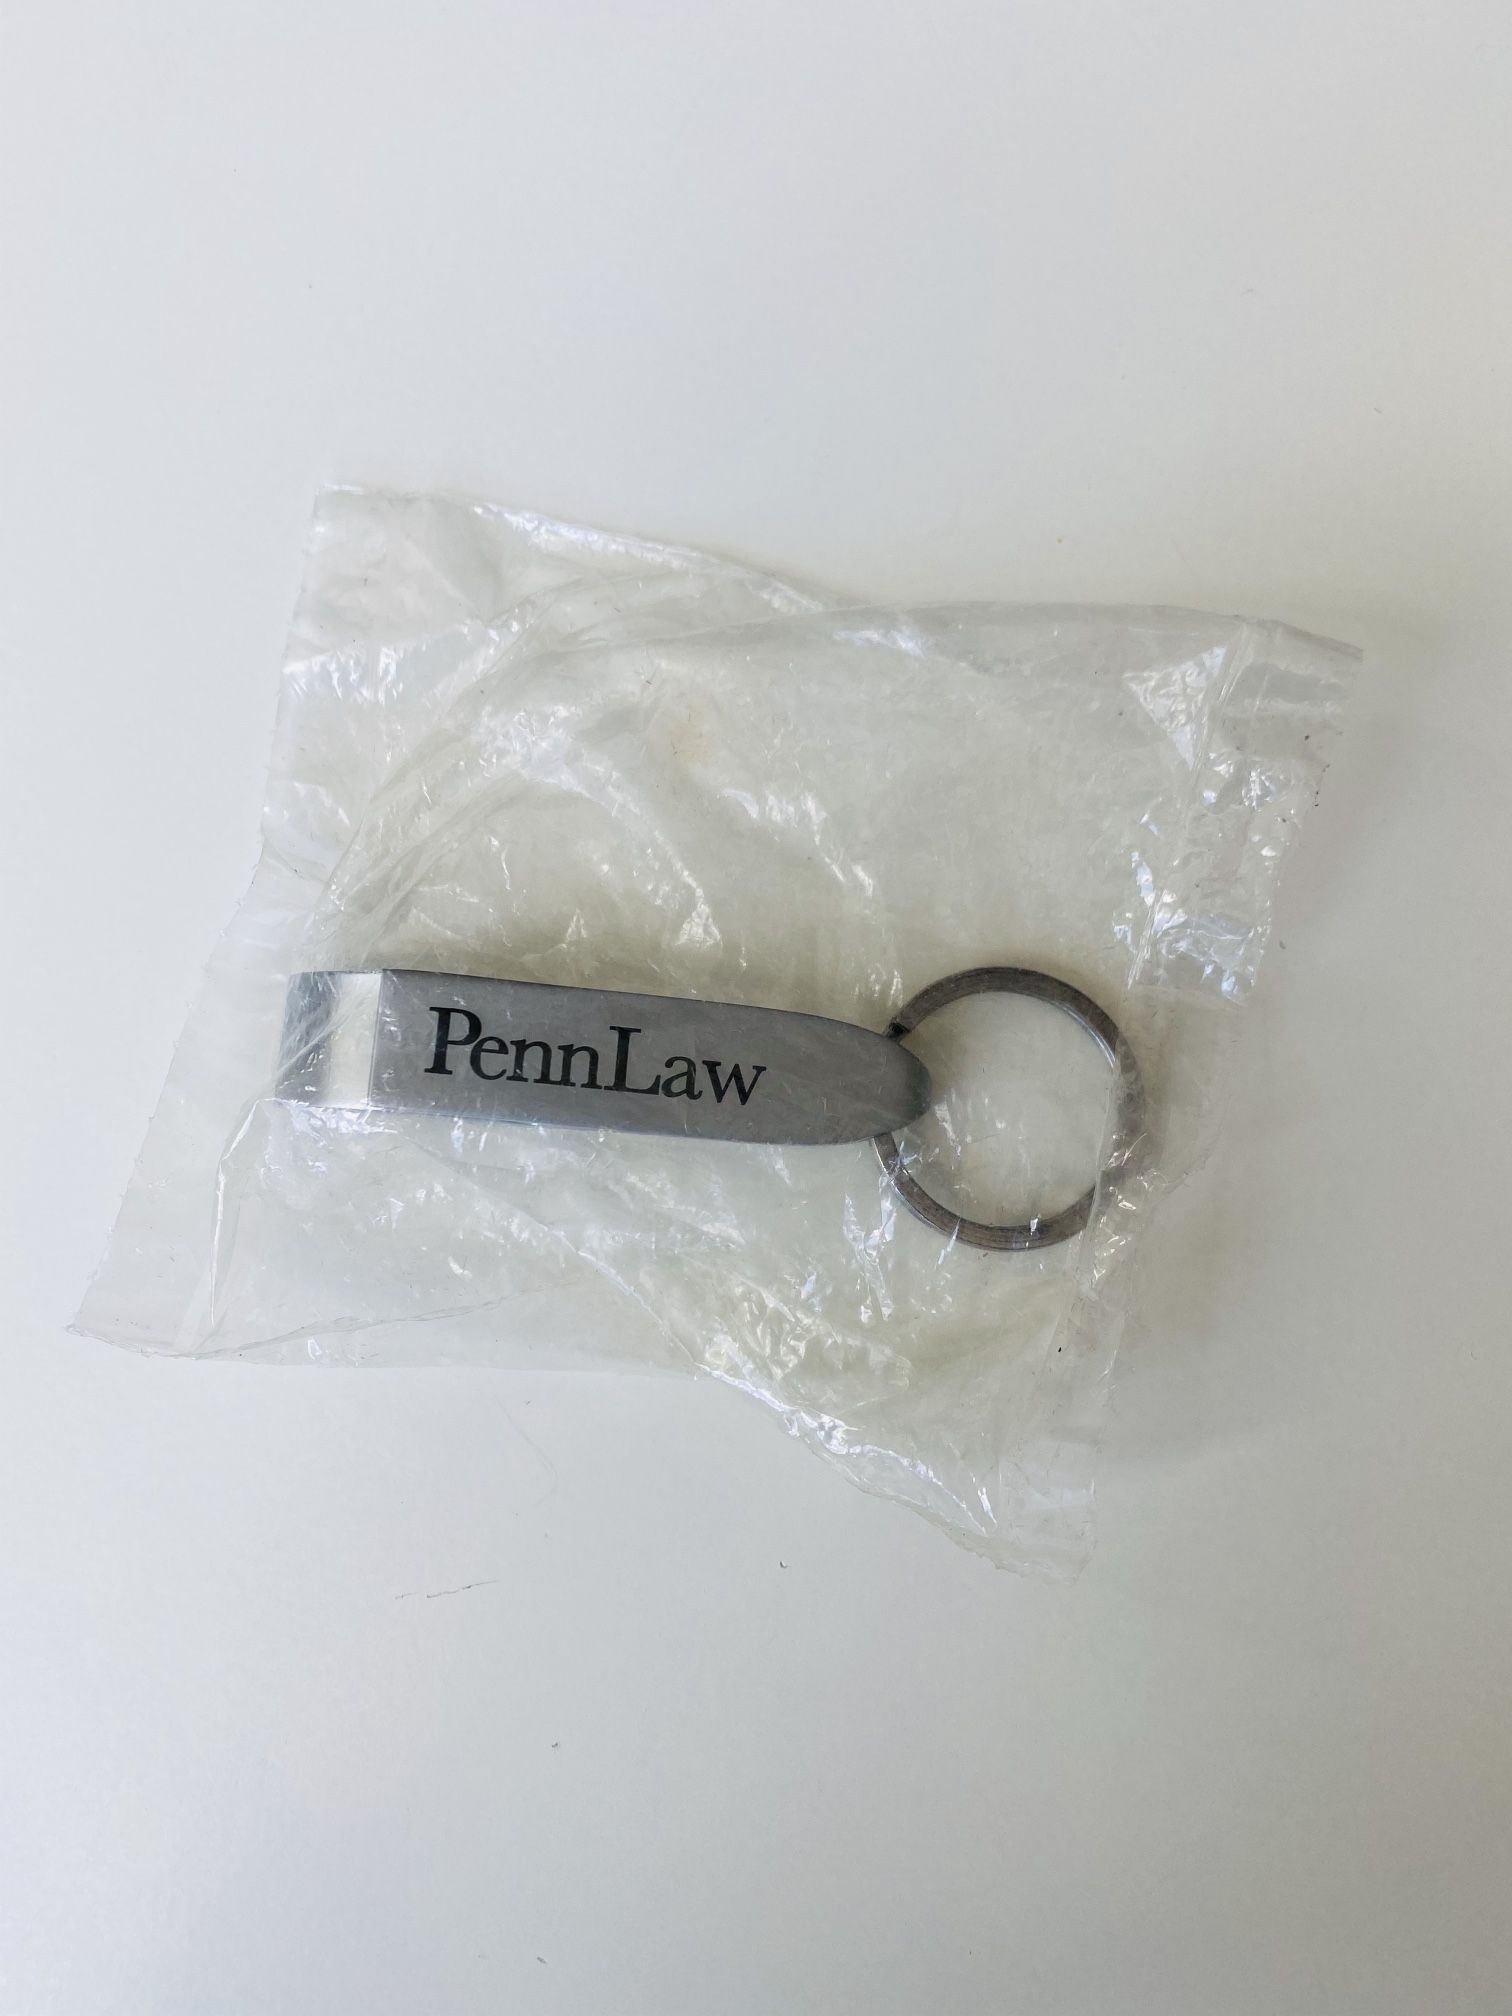 Key Chain-Bottle Opener. University of Pennsylvania Law School logo. High quality metal. Attach it to your keys and you will be always ready to have a